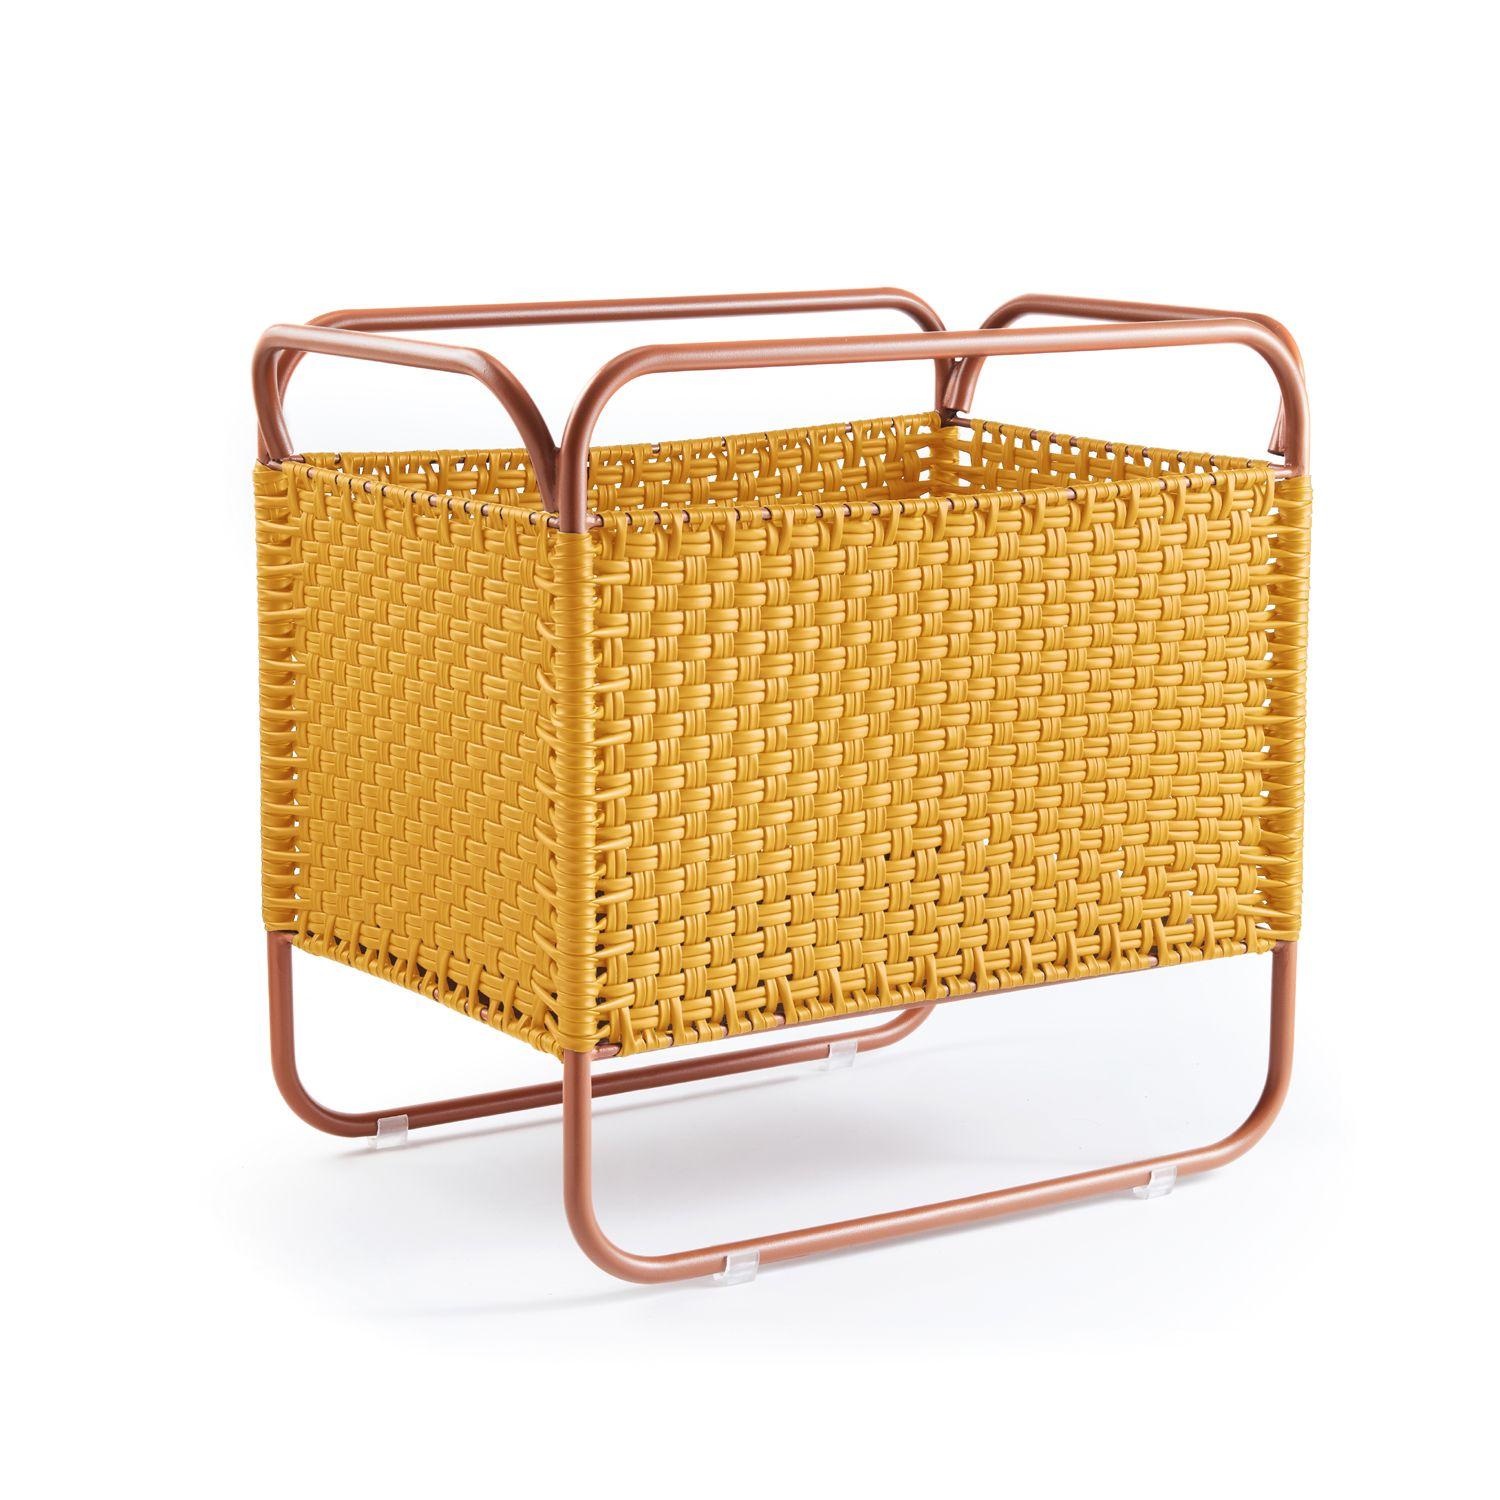 Dichas basket I by Cristina Celestino. 
Materials: PVC strings made from recycled plastic, steel
Dimensions: D 55 x W 38 x H 55 cm 
Available in colors: copper/black red, copper/honey yellow, copper/moss green. Available in other sizes.

The